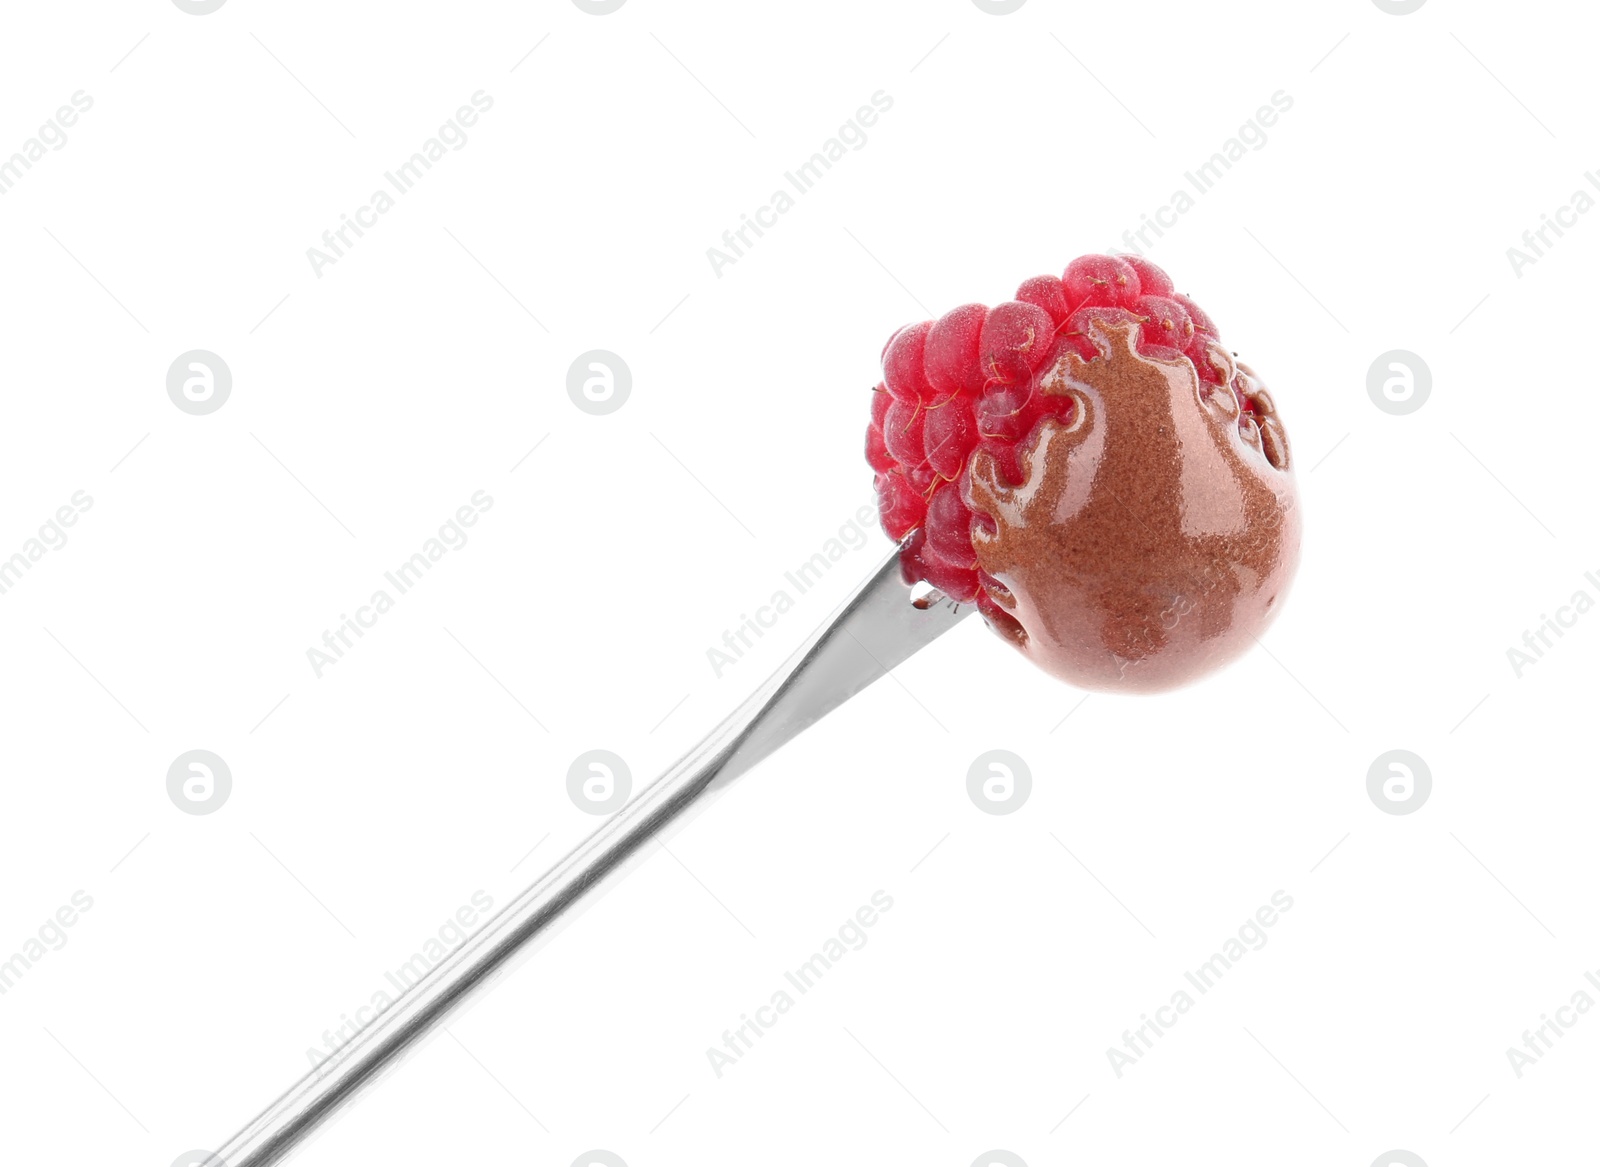 Photo of Raspberry with melted chocolate isolated on fondue fork against white background